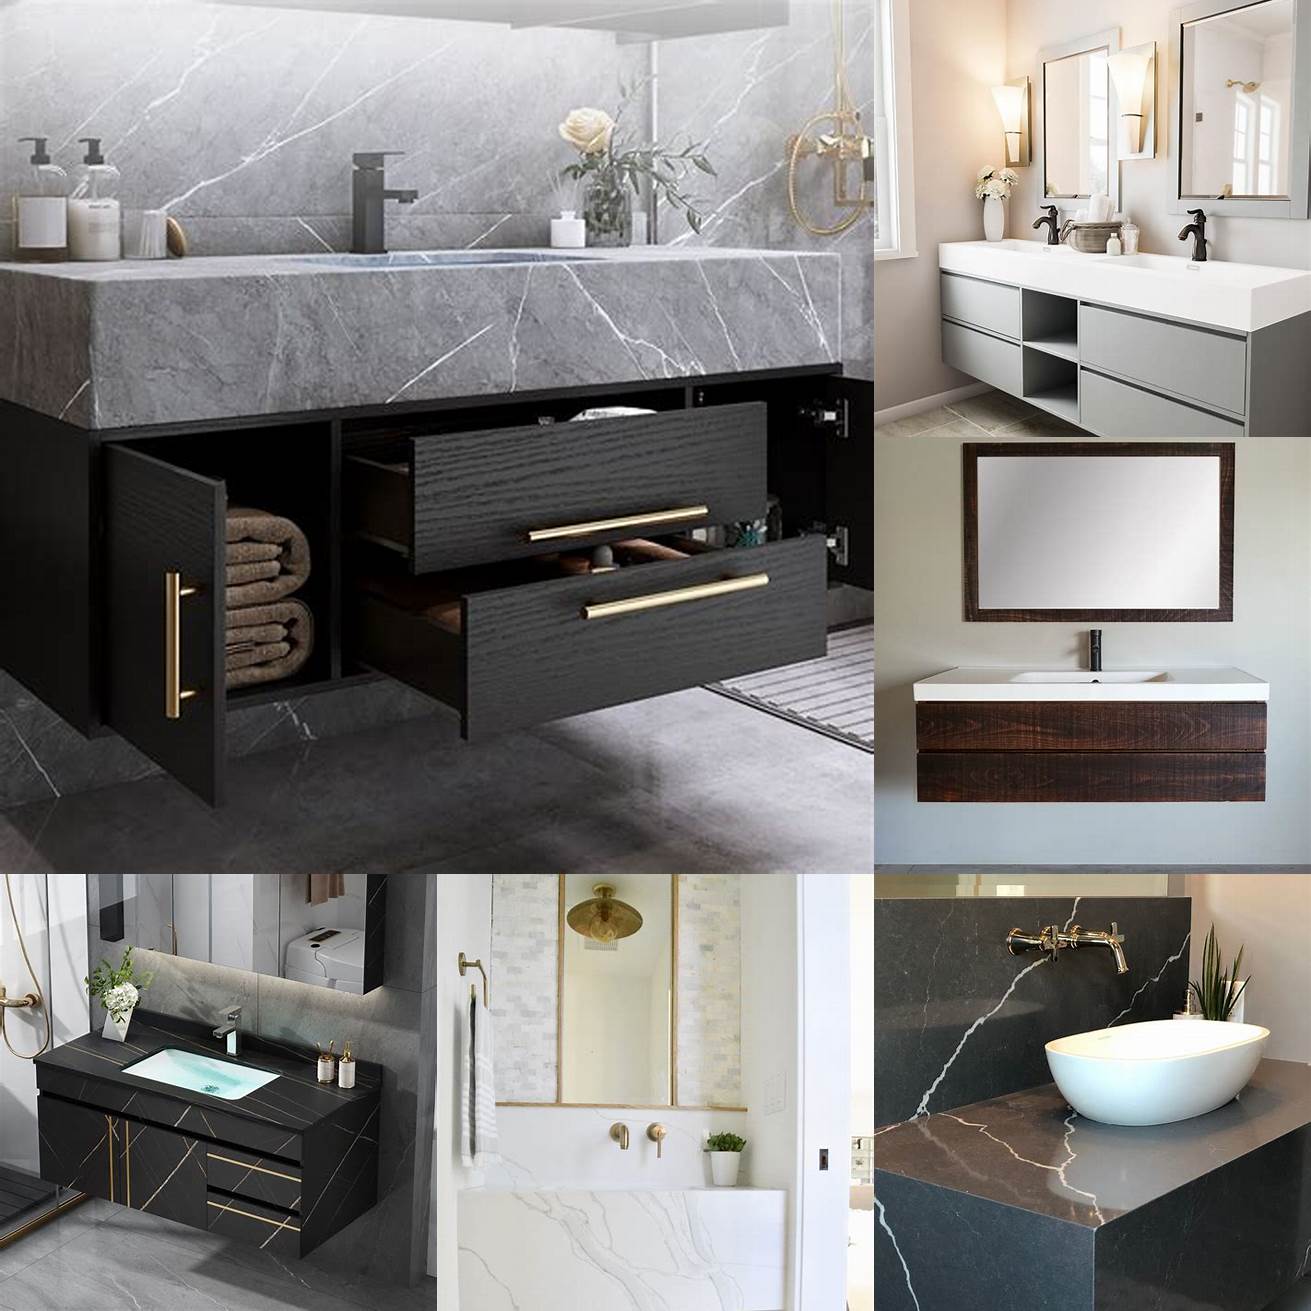 A modern floating vanity with a quartz top